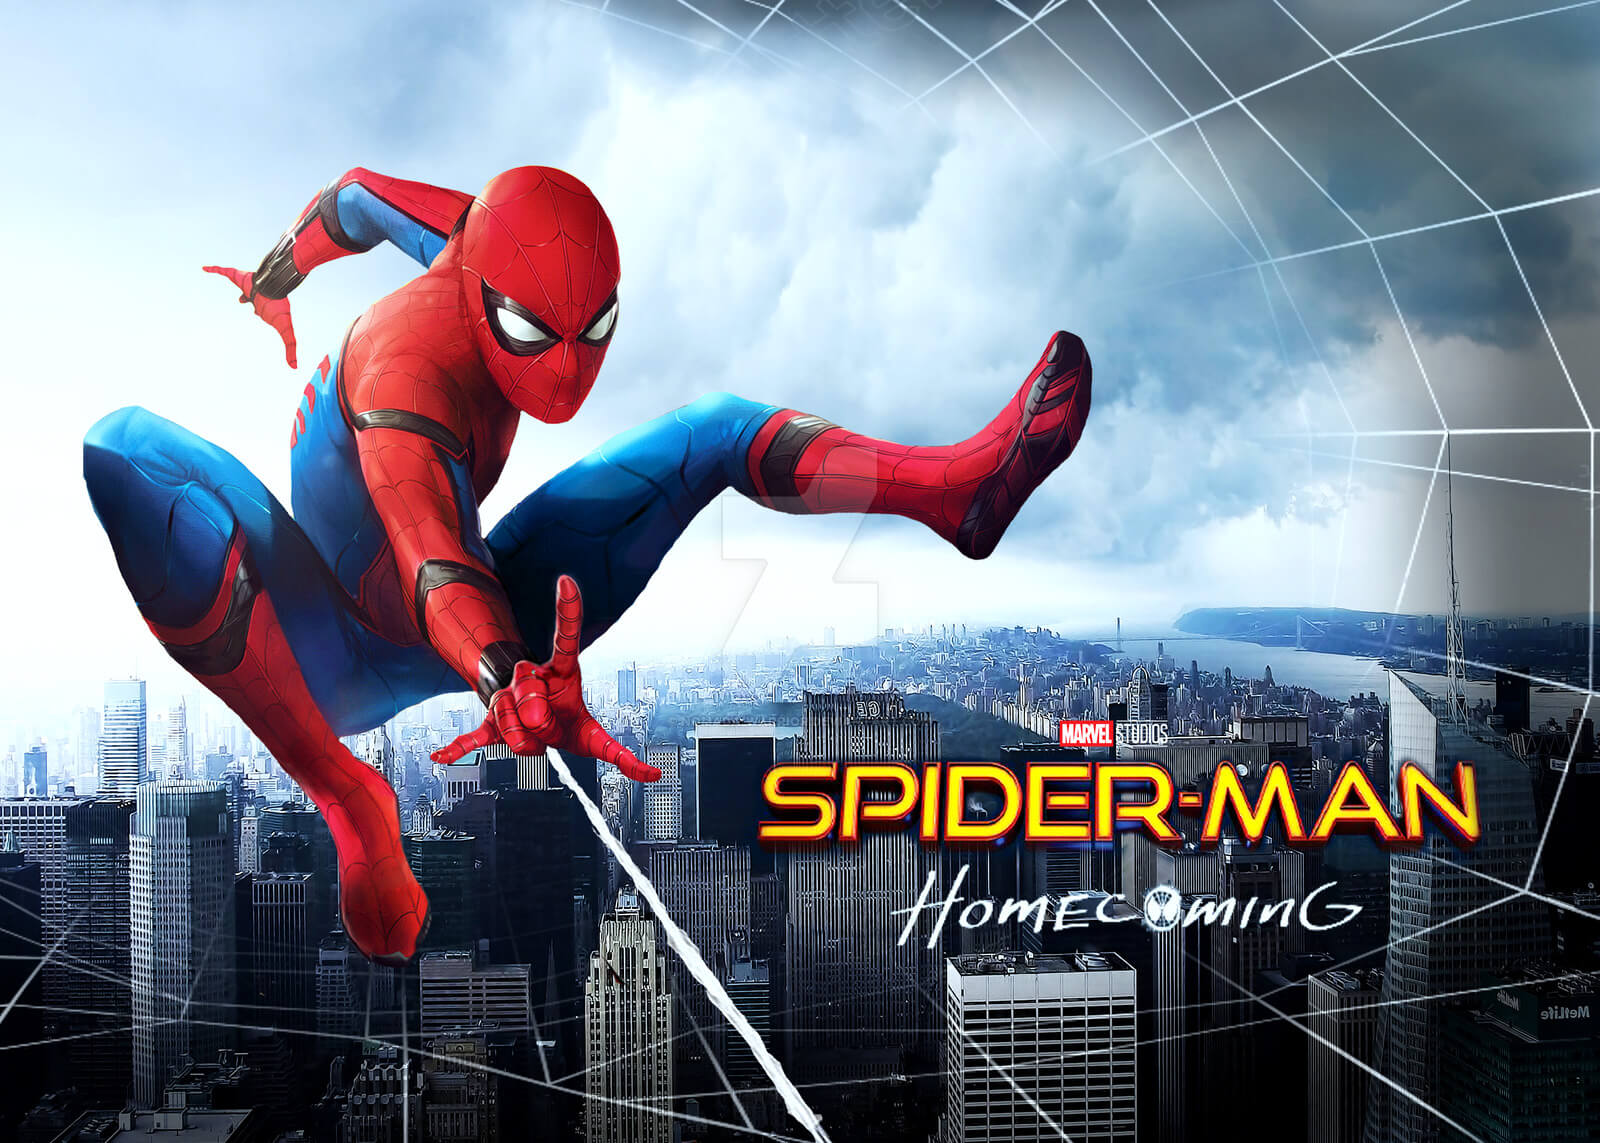 Spider man homecoming poster  2017  by nomada warrior davwt5l  1 